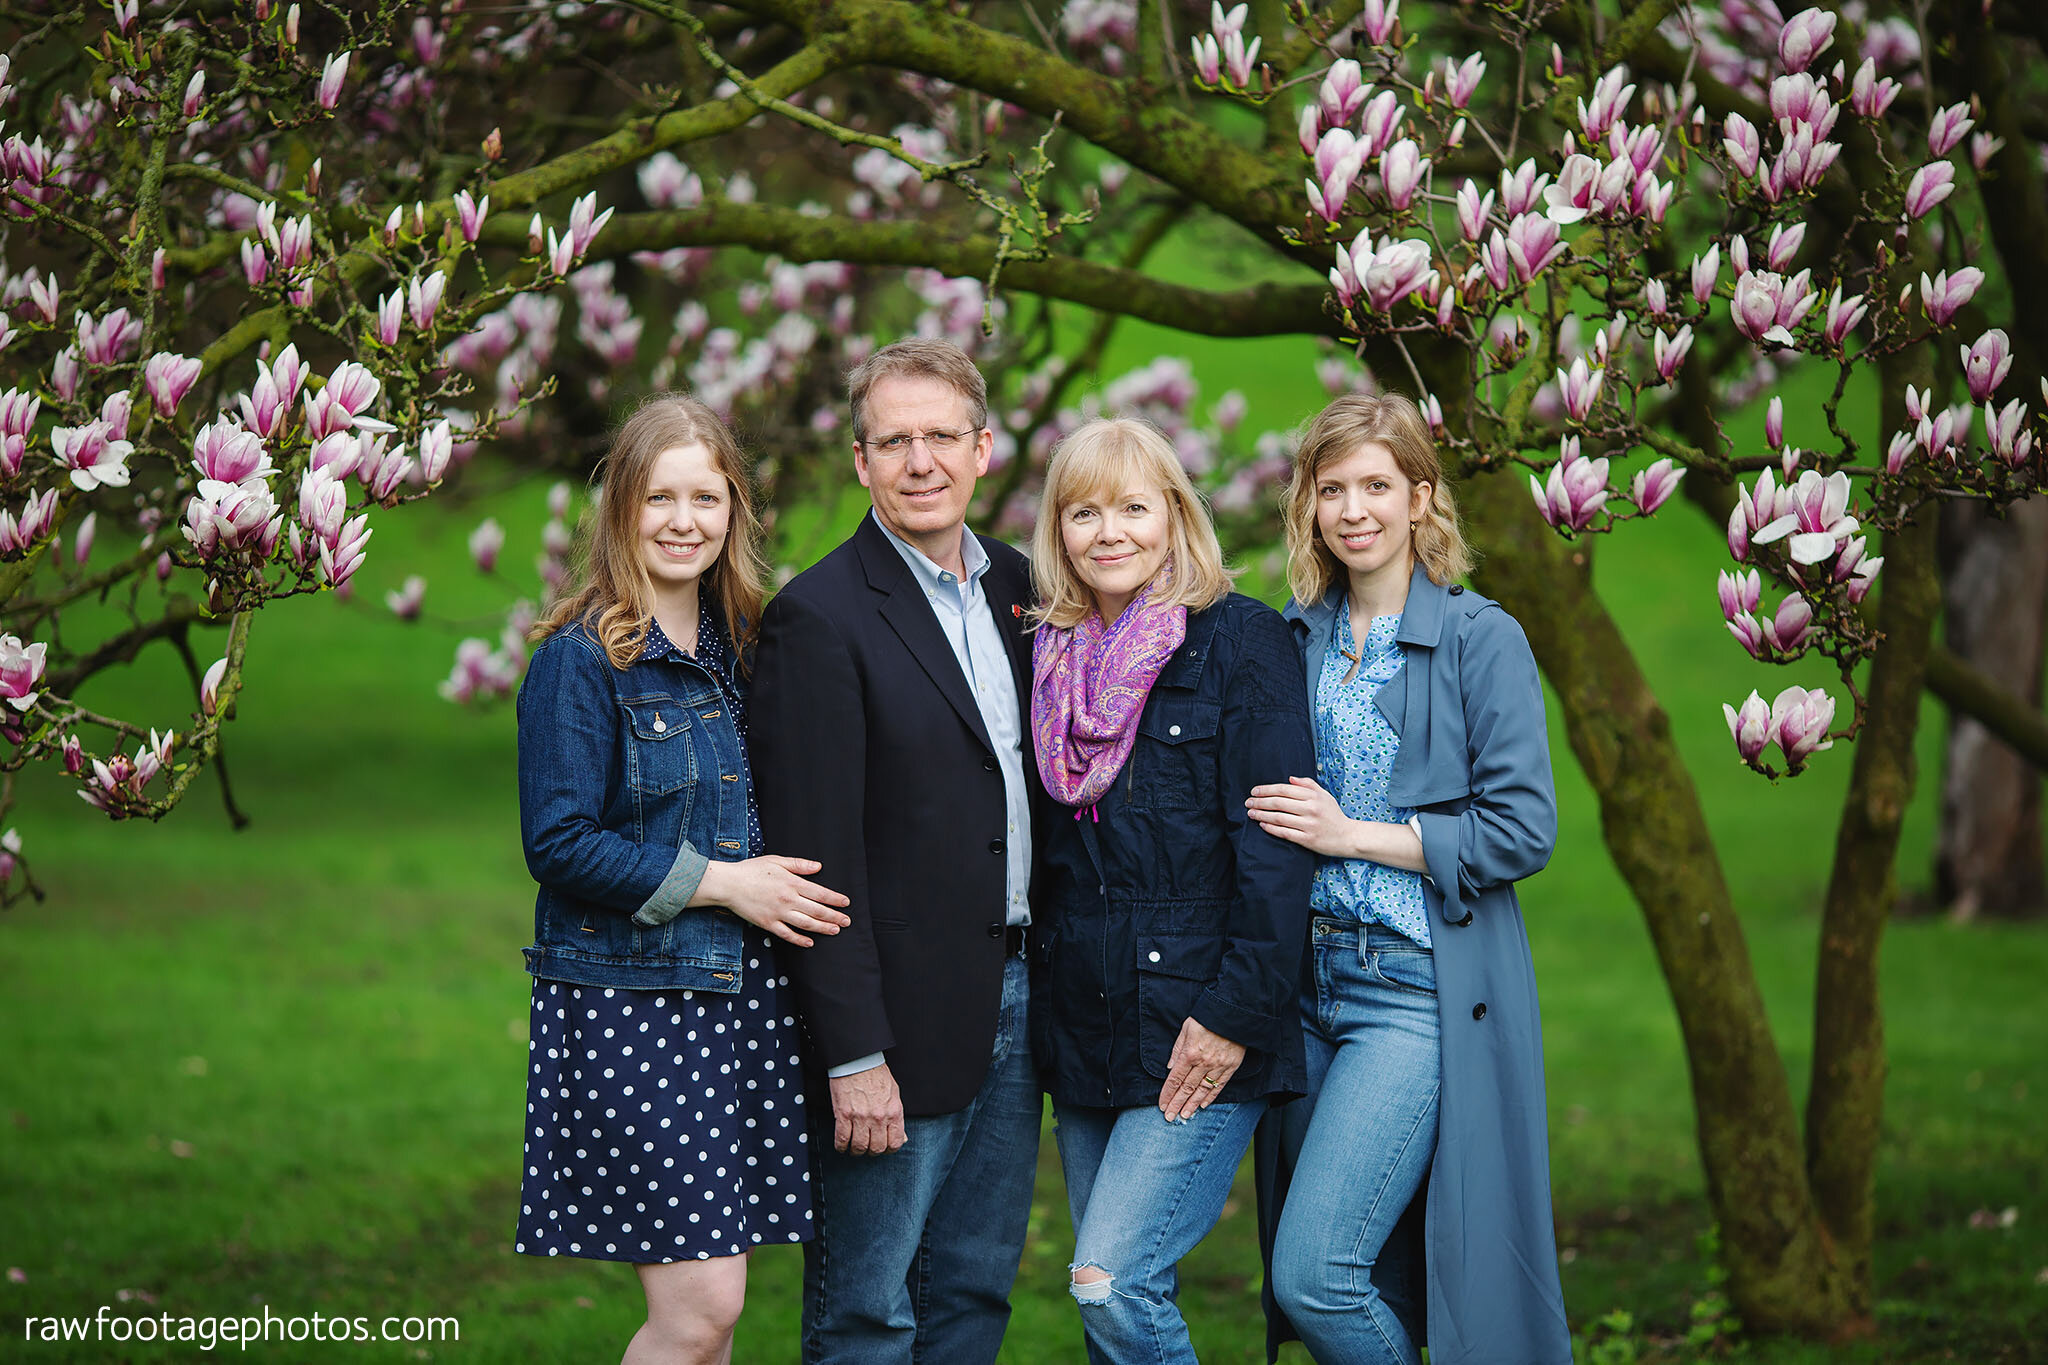 london_ontario_family_photographer-raw_footage_photography-spring_blossoms-extended_family_session-magnolia-blossoms_008.jpg